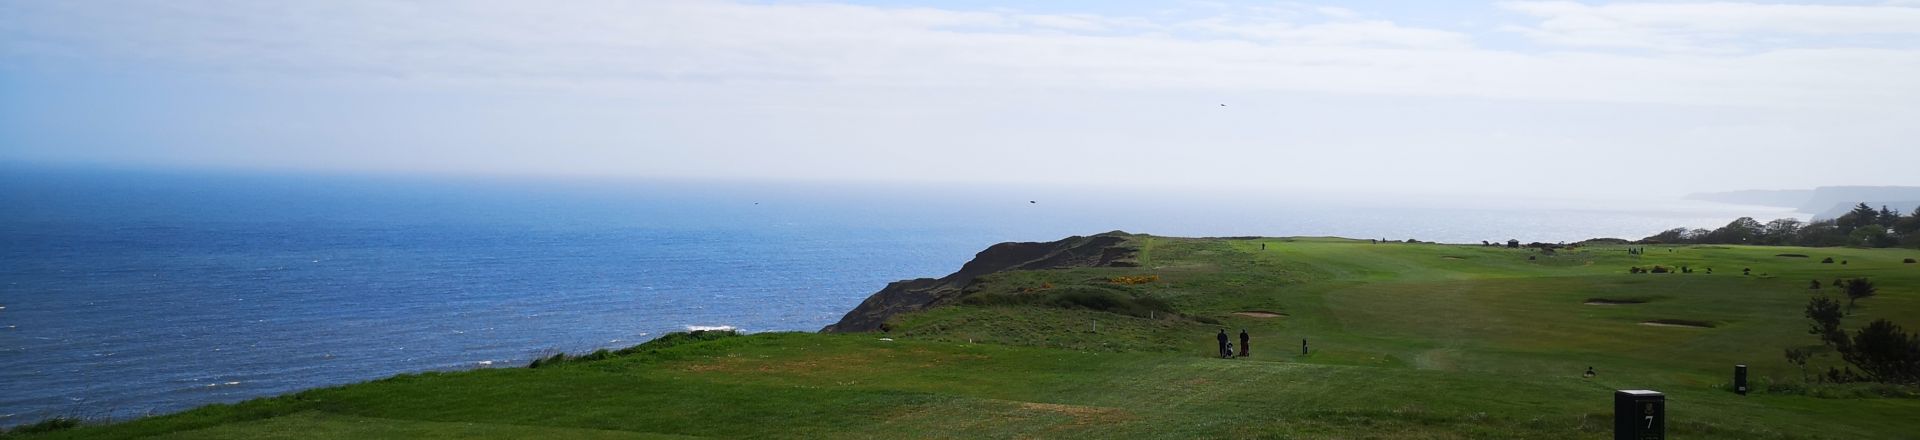 Golf Tours on the East Coast of Yorkshire at Scarborough Golf Club